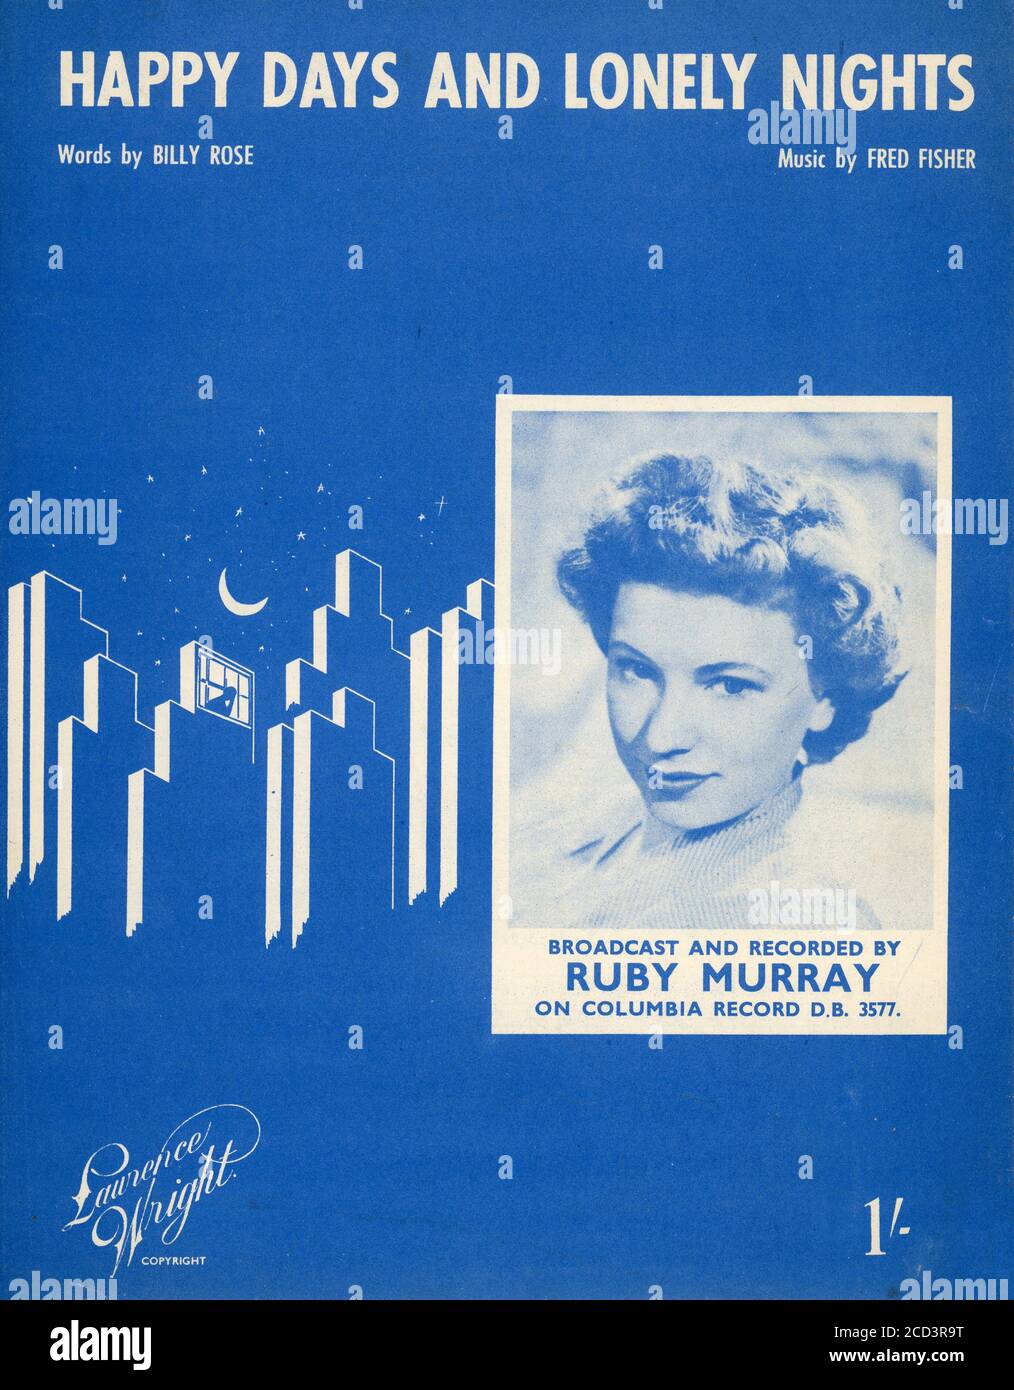 Sheet Music - Happy Days and Lonely Nights - Ruby Murray - 1955 Stock Photo